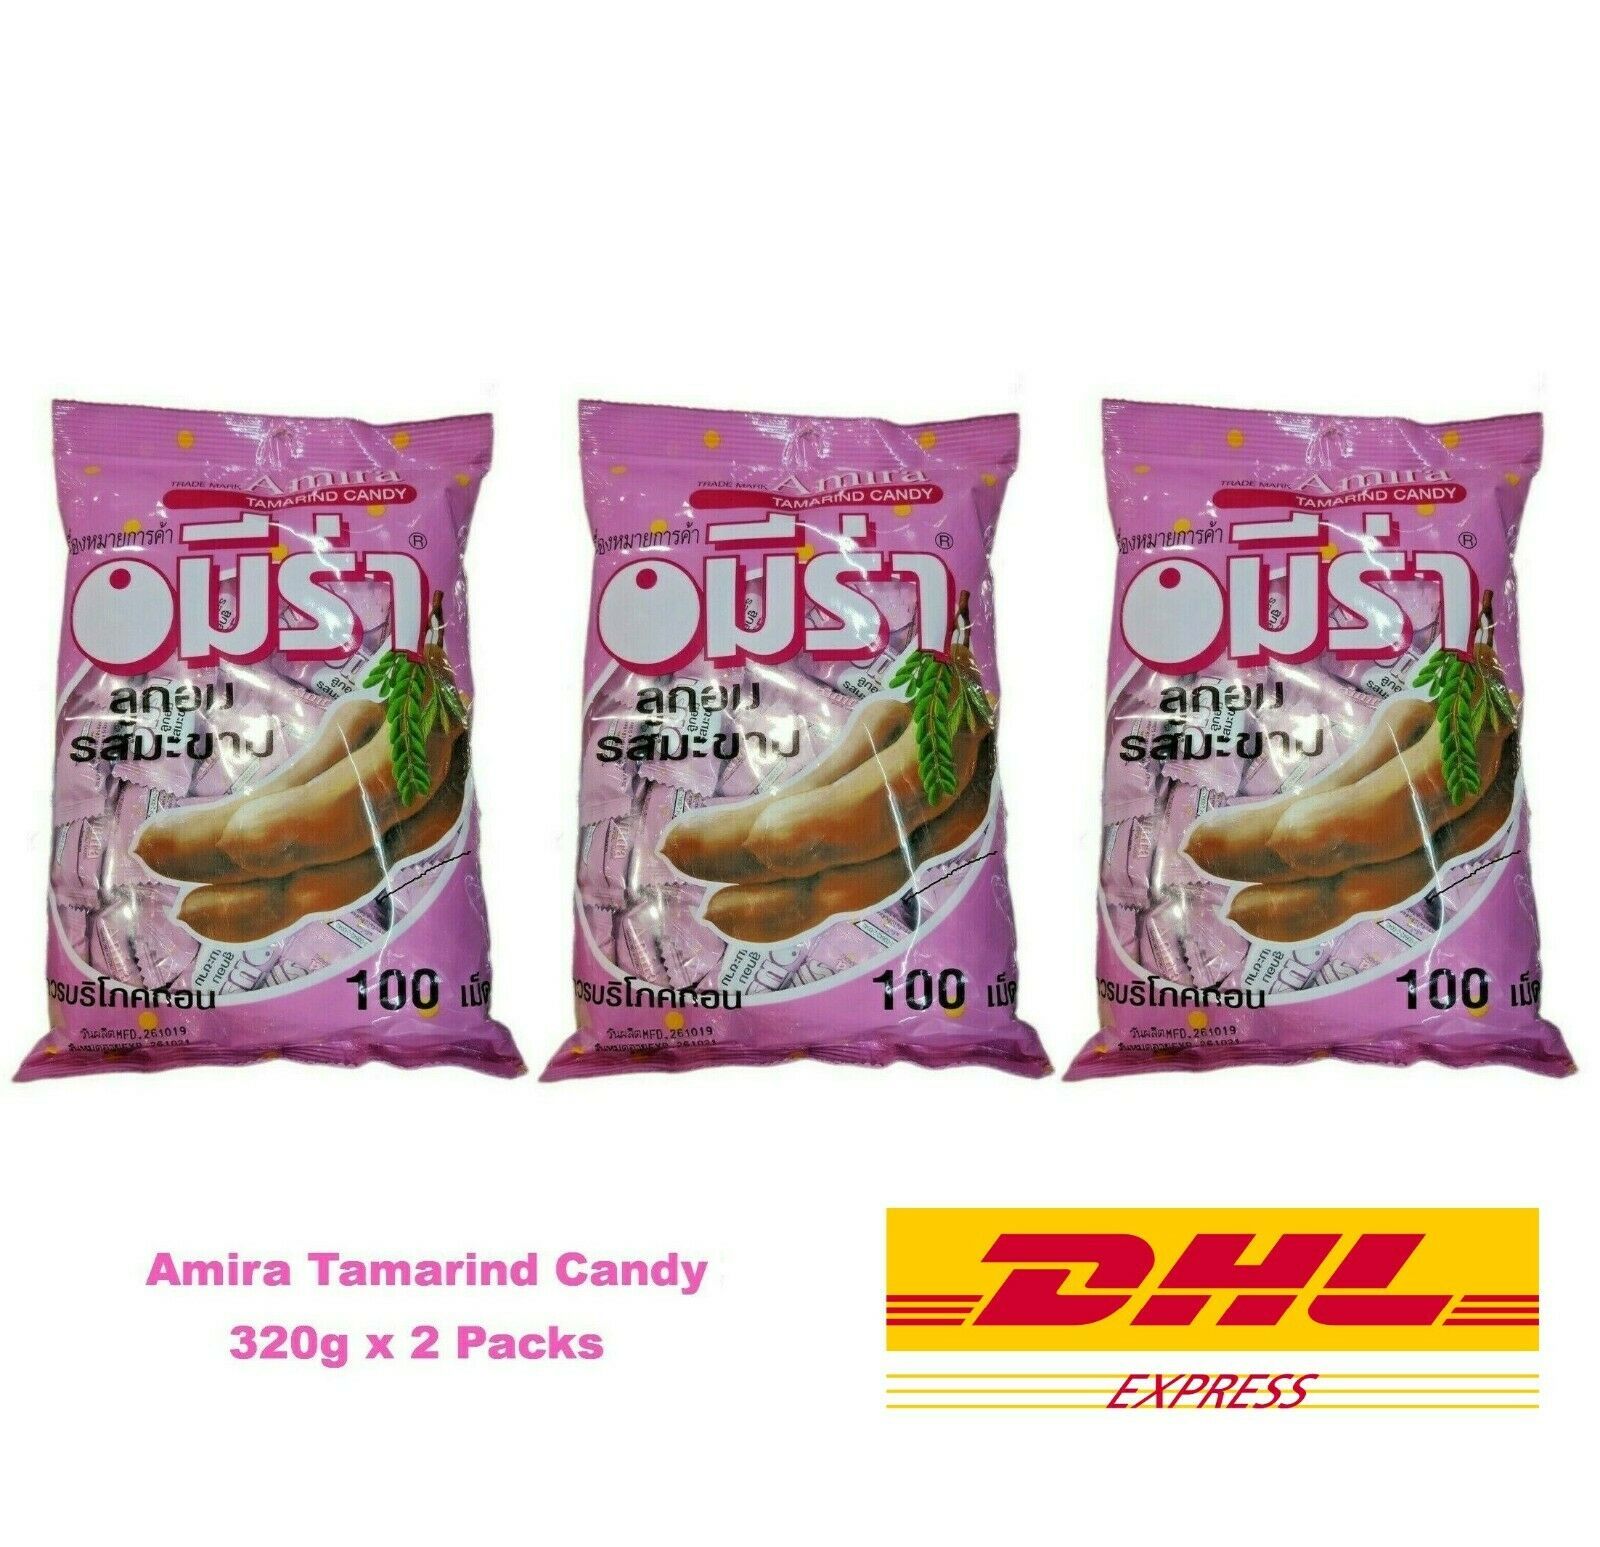 300 Tabs Amira Tamarind Candy Sweet & Sour Delicious Tamarind Candy Pack